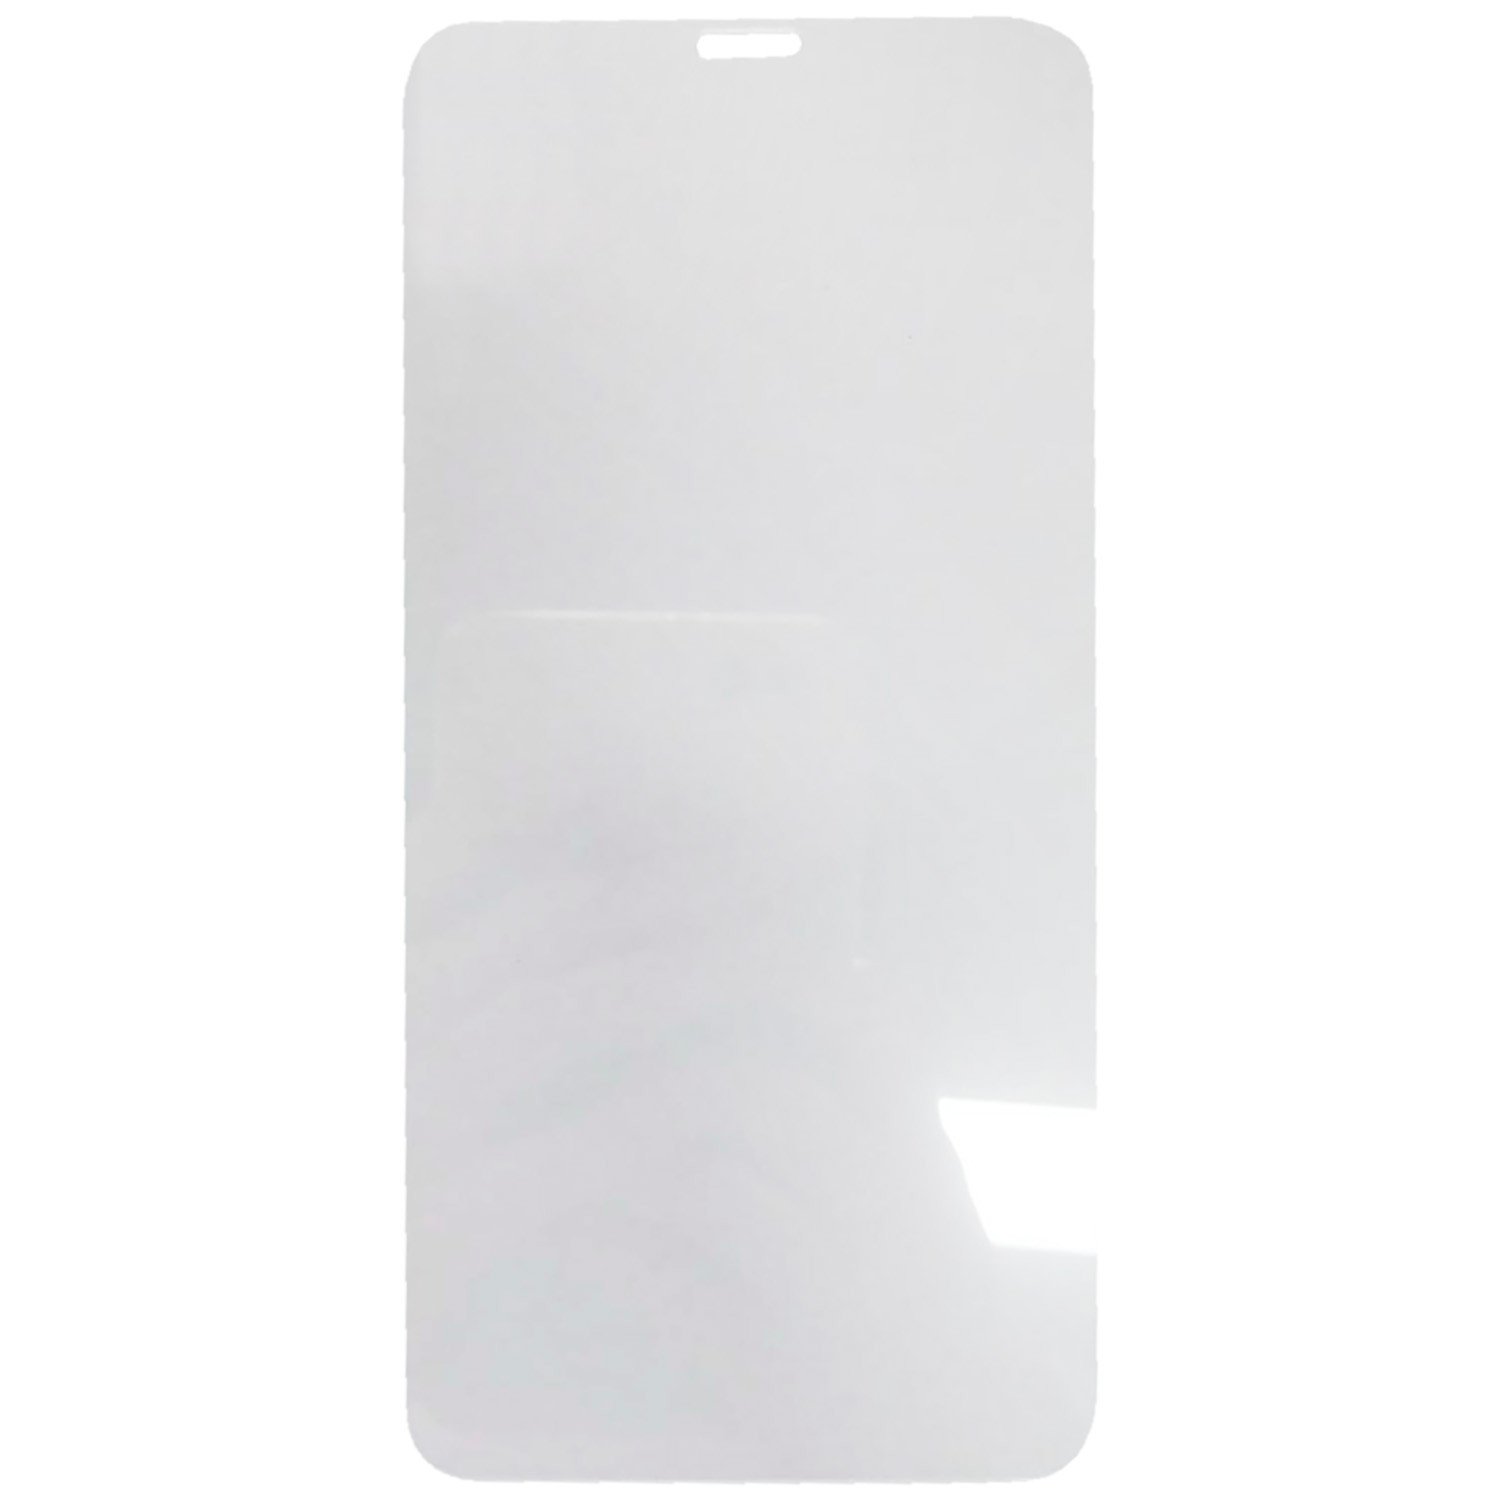 Pack of 2 iPhone X/XS/11 Pro Screen Protectors Image